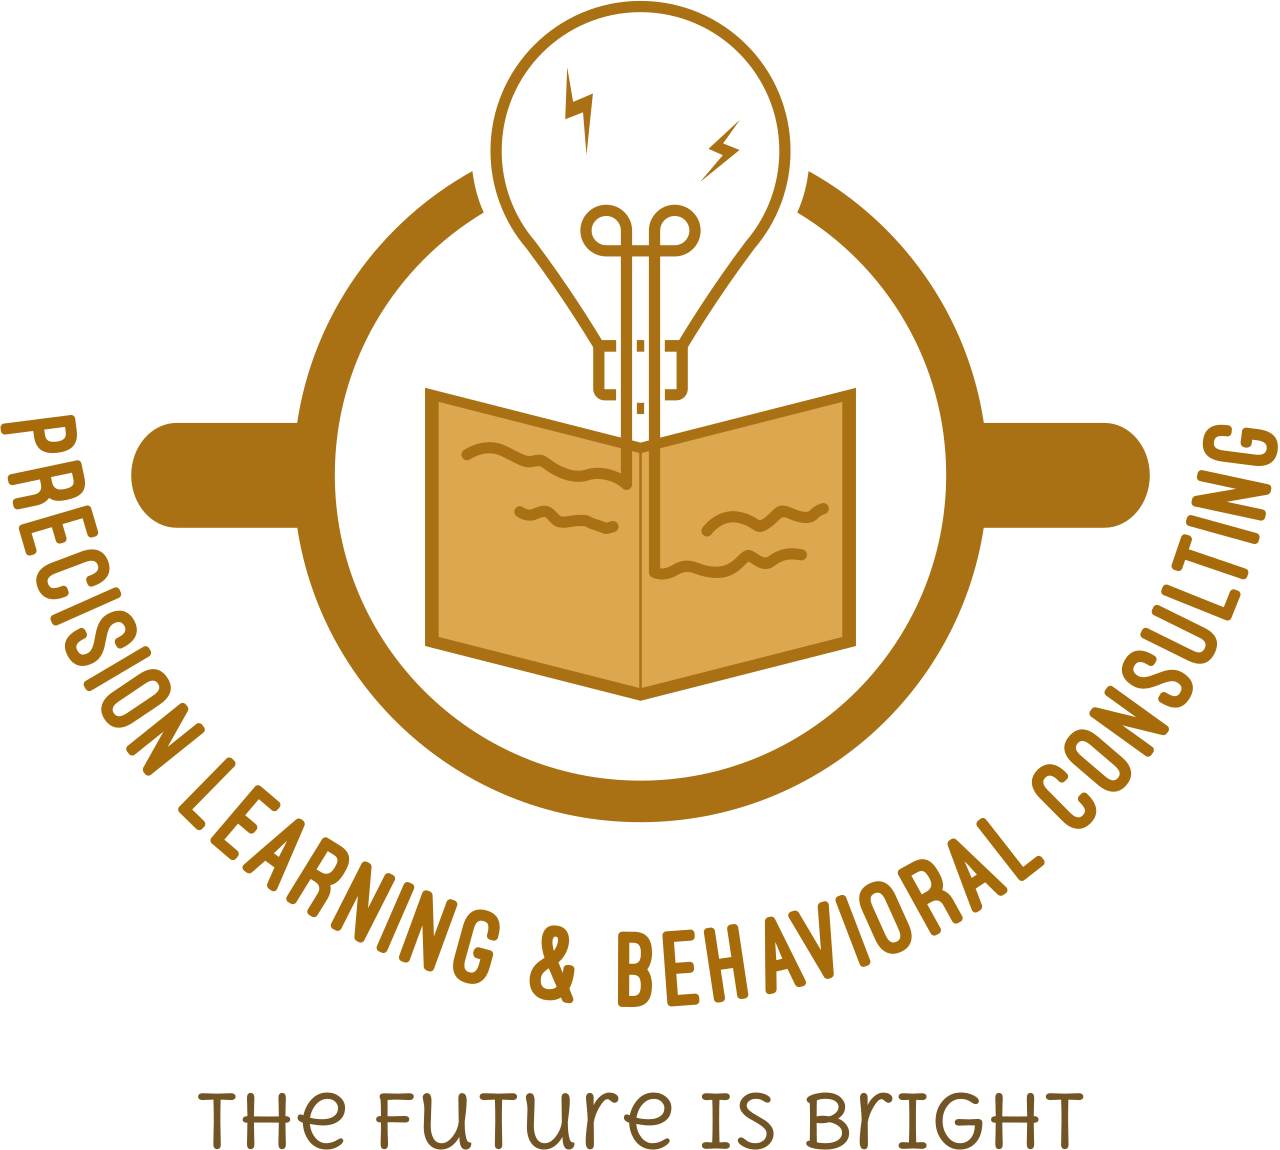 Precision Learning & Behavioral Consulting's web page